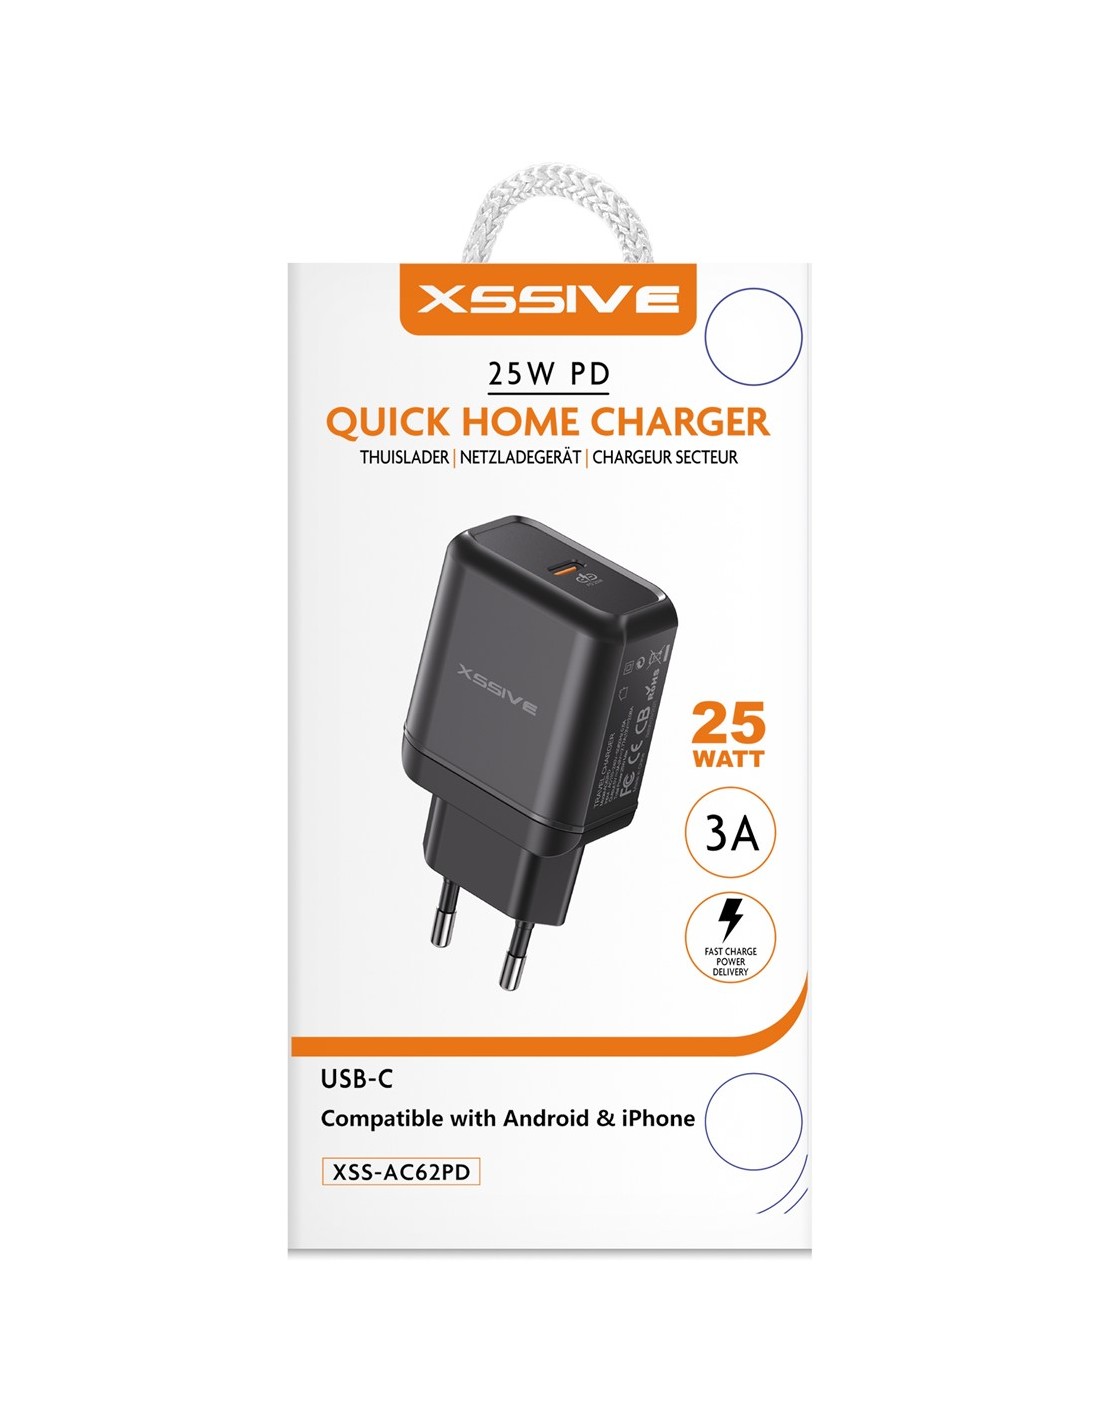 https://high-techstore.com/3607-thickbox_default/chargeur-rapide-usb-type-c-25w-pd-30-pps-xssive-xss-ac62pd.jpg